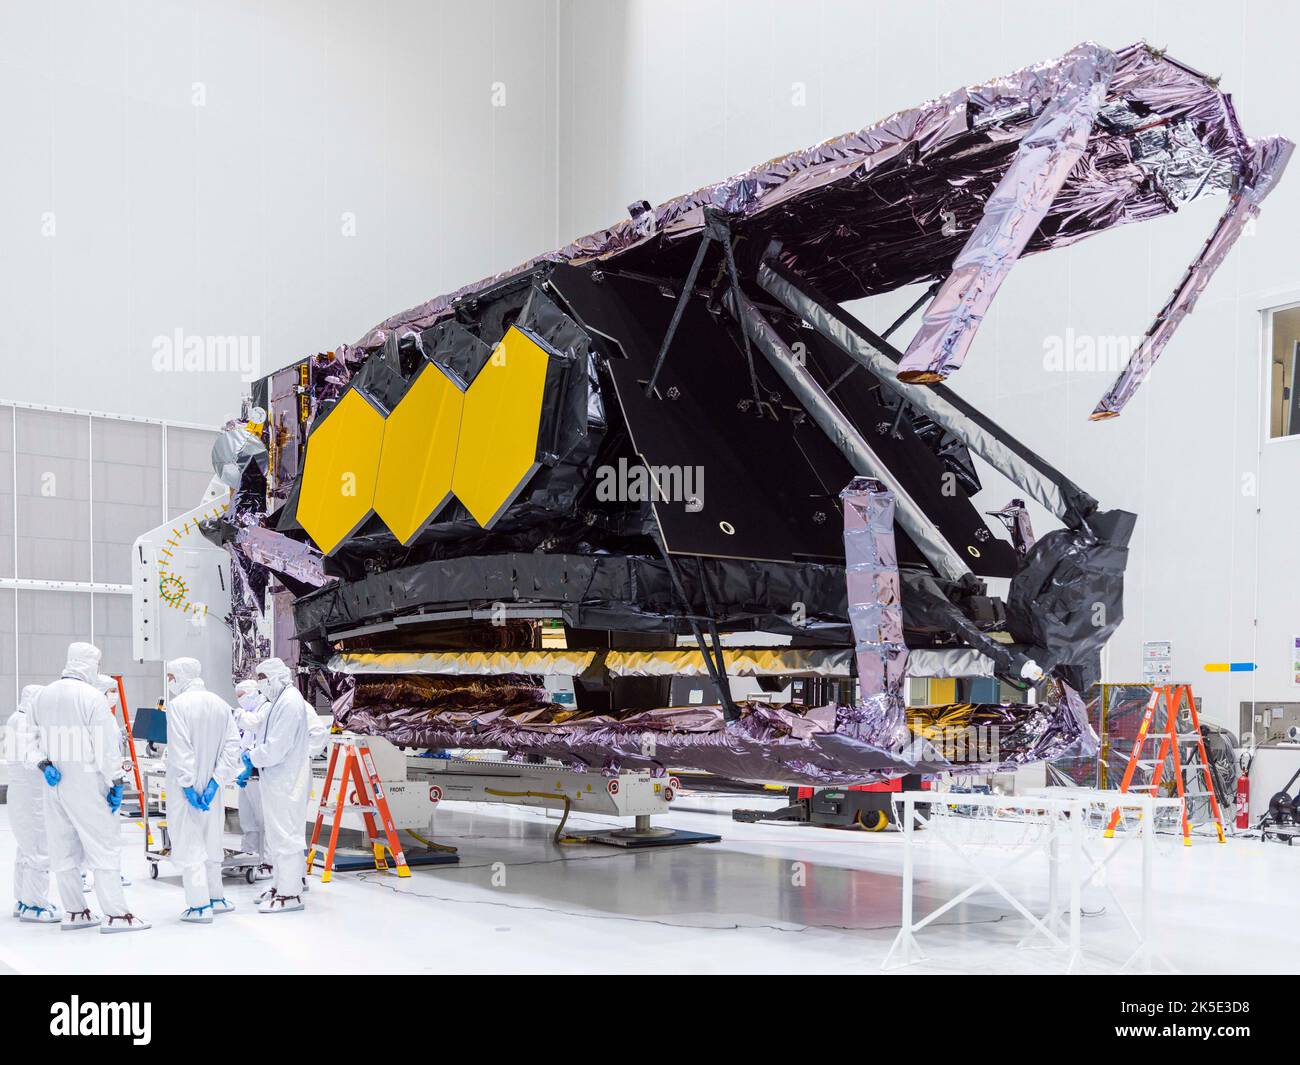 The James Webb Space Telescope (JWST in the cleanroom at the launch site at the Guiana Space Center in French Guiana after a 5,800-mile move from the USA. After its arrival, Webb was carefully lifted from its packing container and then raised vertical. This is the same configuration Webb will be in when it is inside its launch vehicle, the Ariane 5 rocket.  An optimised version of a NASA image by experienced lead photographer Chris Gunn. Credit: NASA/Chris Gunn. For editorial use only. Stock Photo